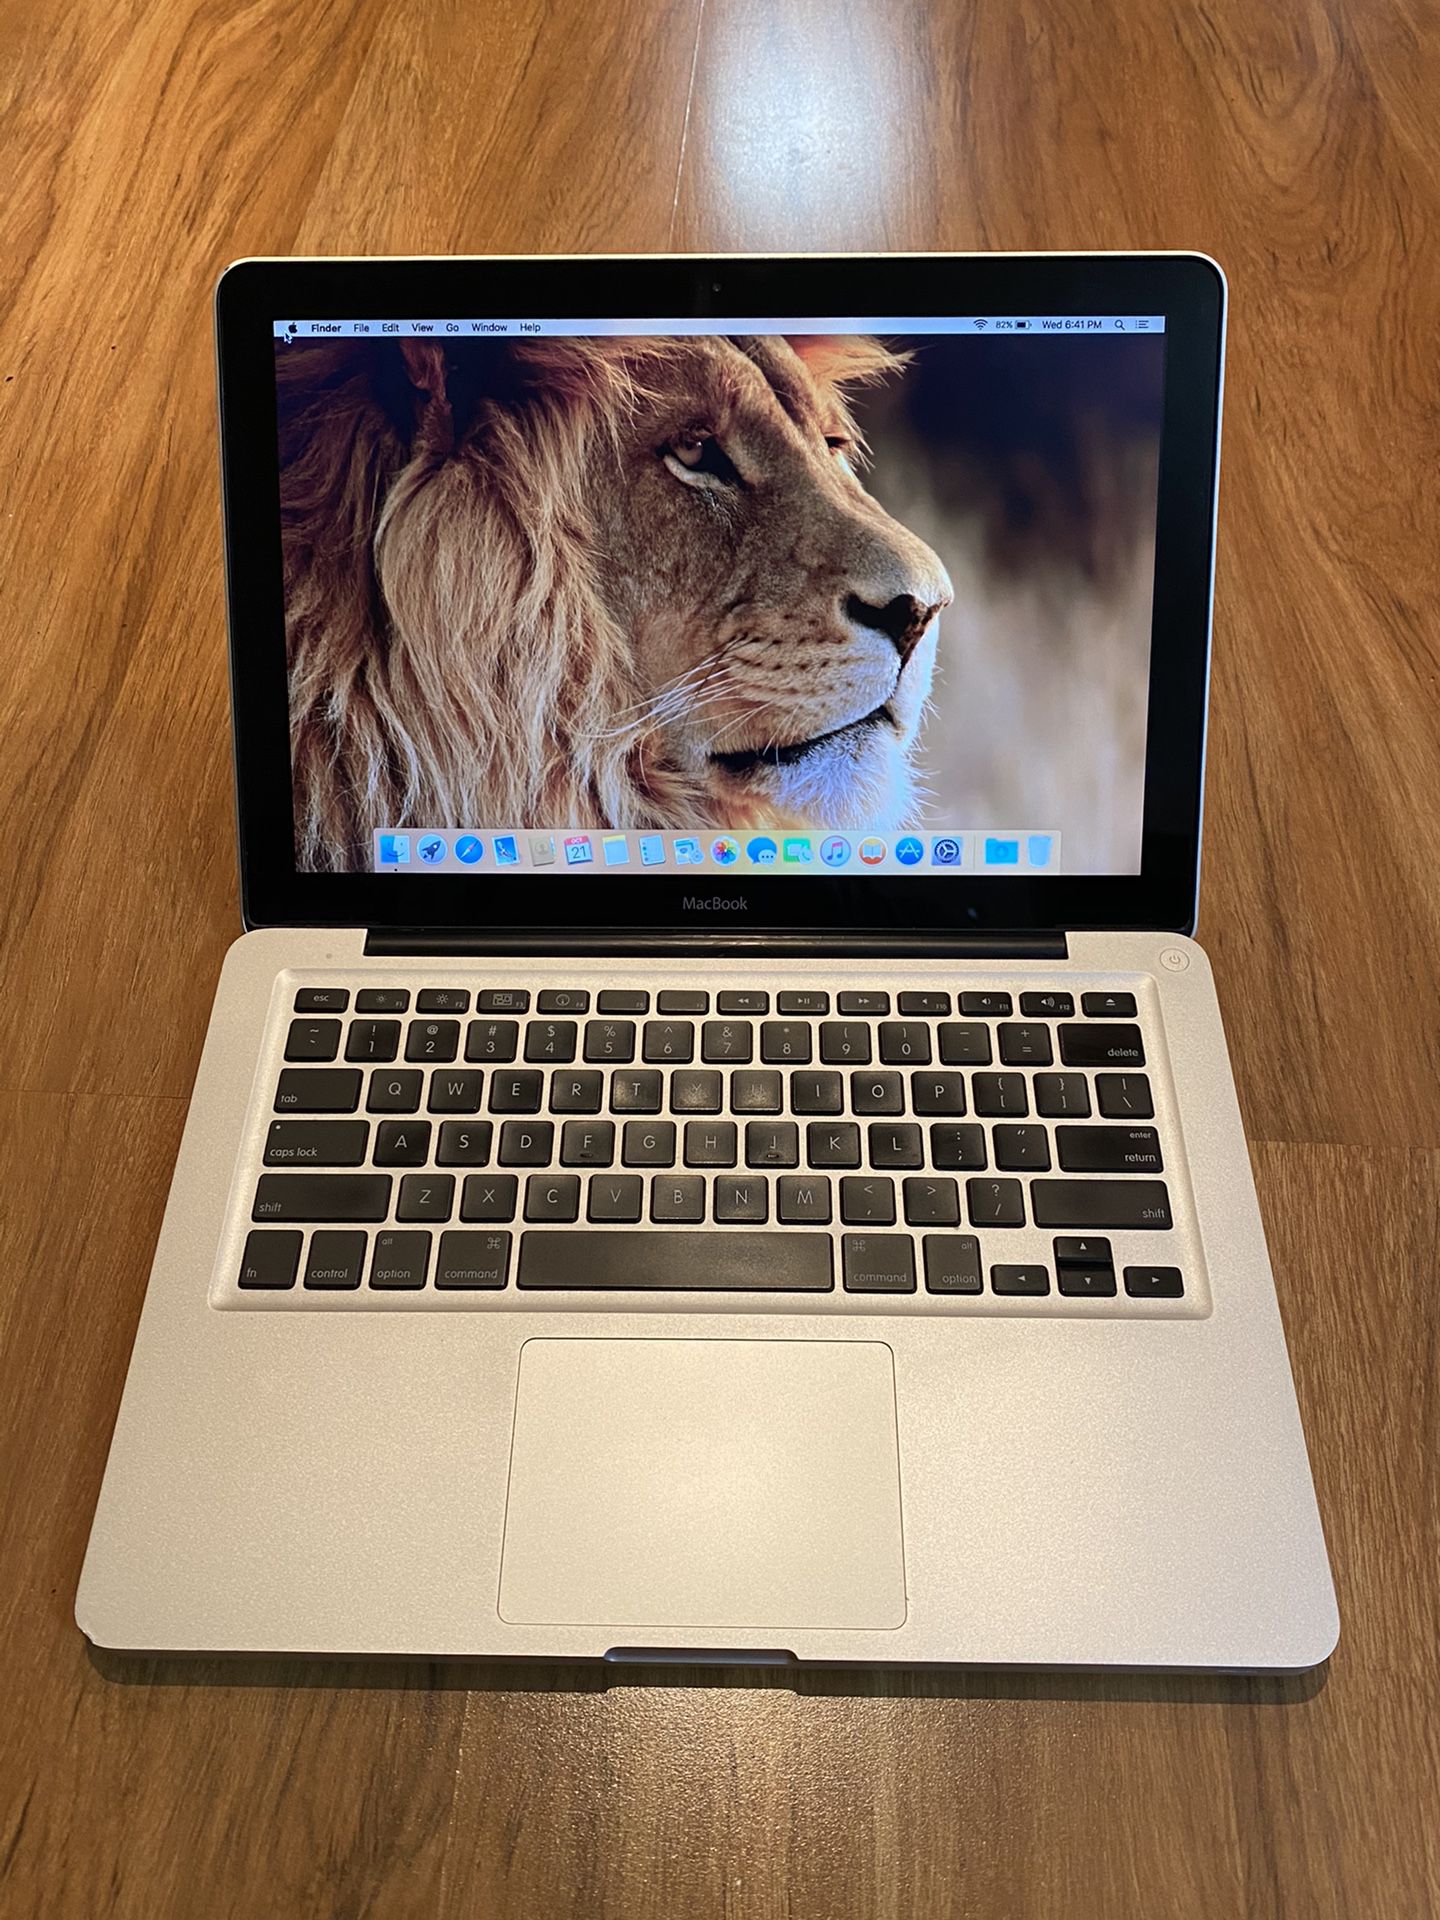 Macbook Pro OS El Capitan 10.11.6 (13 inch-Late 2008) 4GB Ram 320GB Hard Drive 13.3 inch HD Screen Laptop with charger in Excellent Working condition!